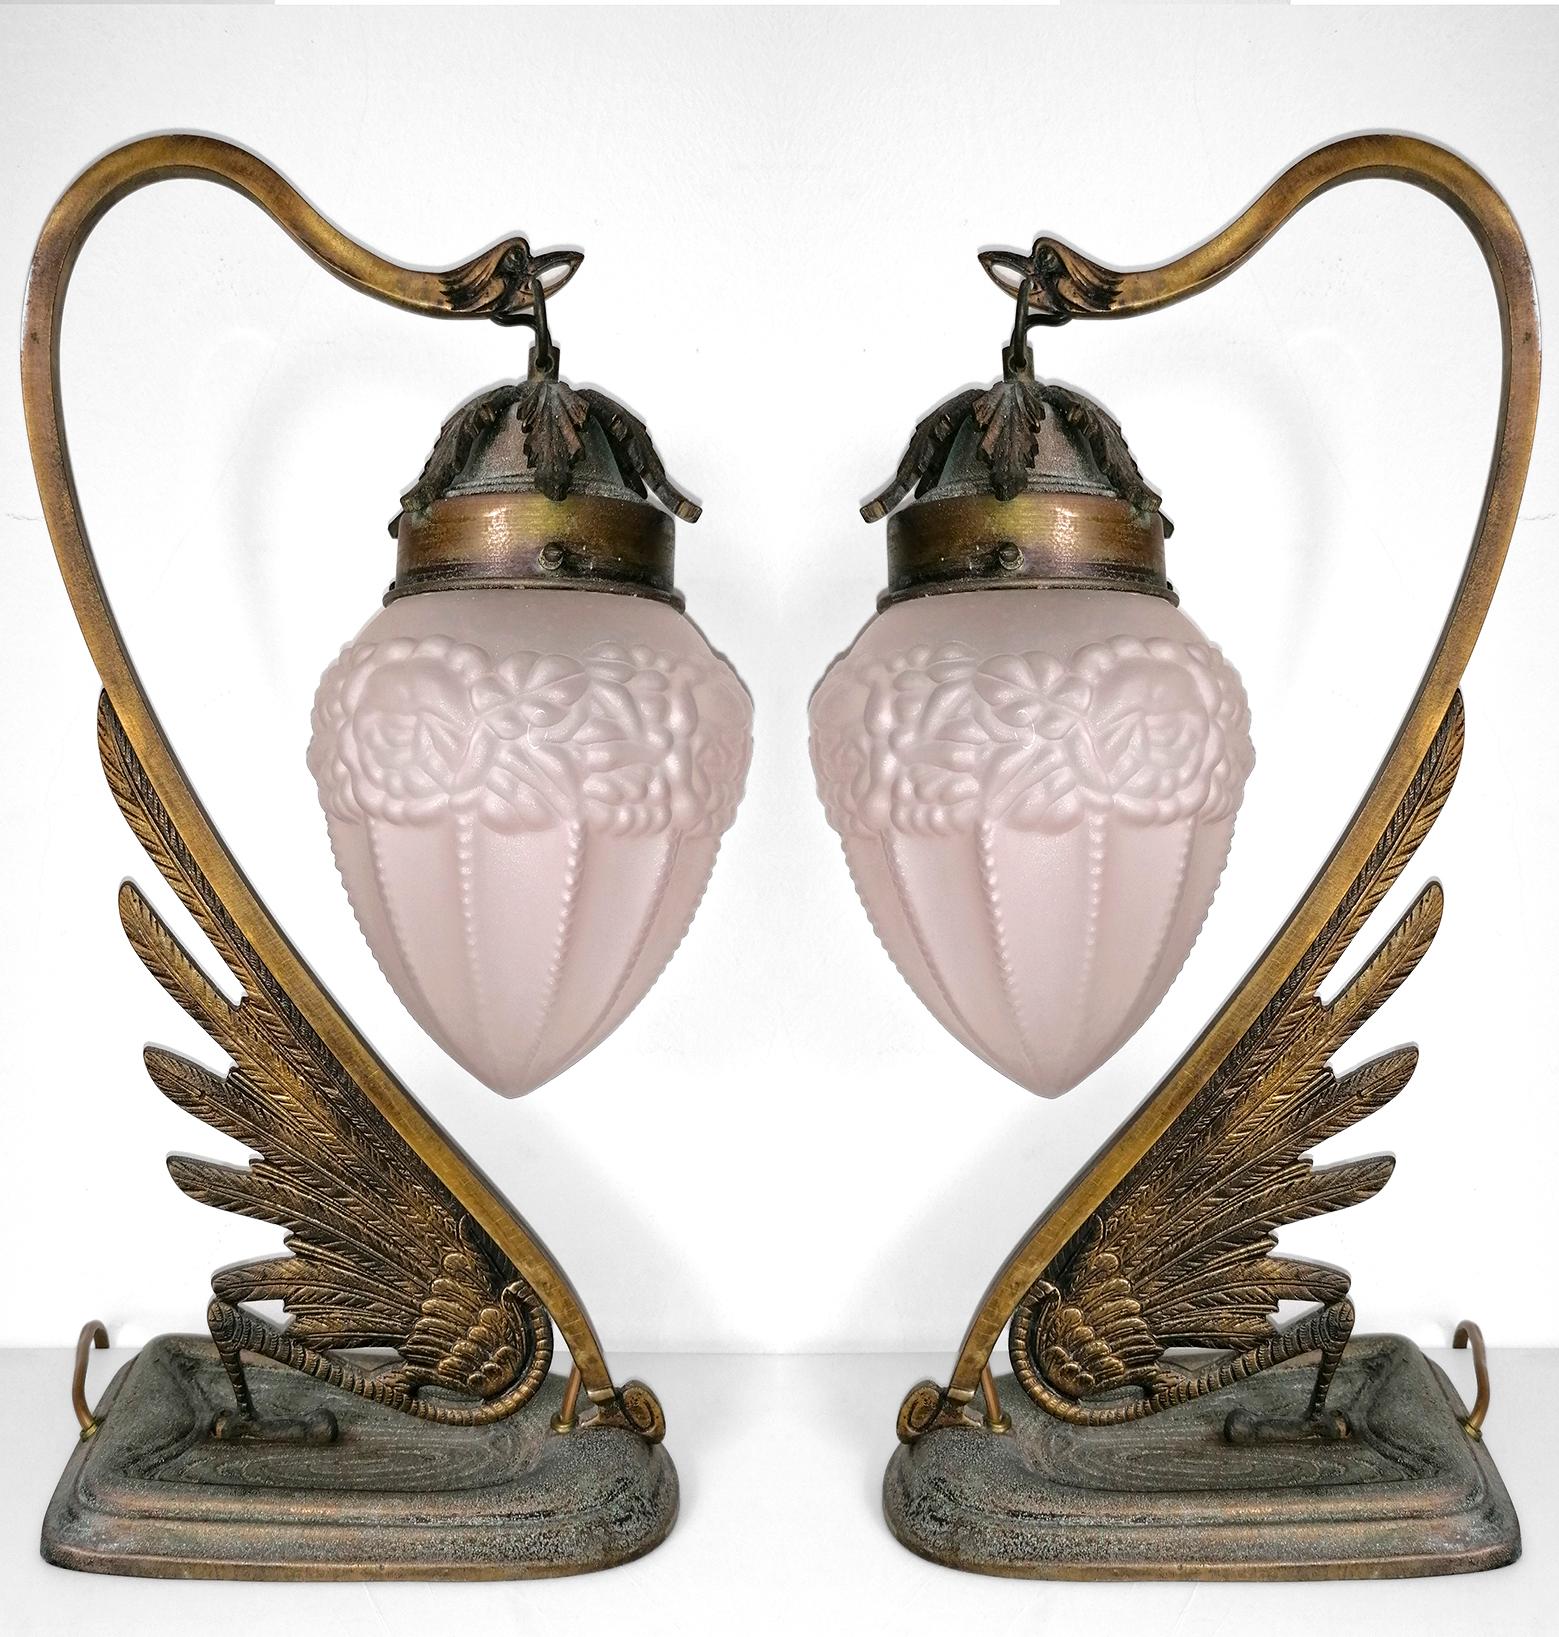 Gorgeous pair of antique French Art Nouveau and Art Deco table lamps. Ornate engraved bronze and frosted pale pink satin glass flower lamp shades.
Dimensions
Height: 16.54 in. (42 cm)
Width: 9.85 in. (25 cm)
Depth: 5.91 in. (15 cm)
Age